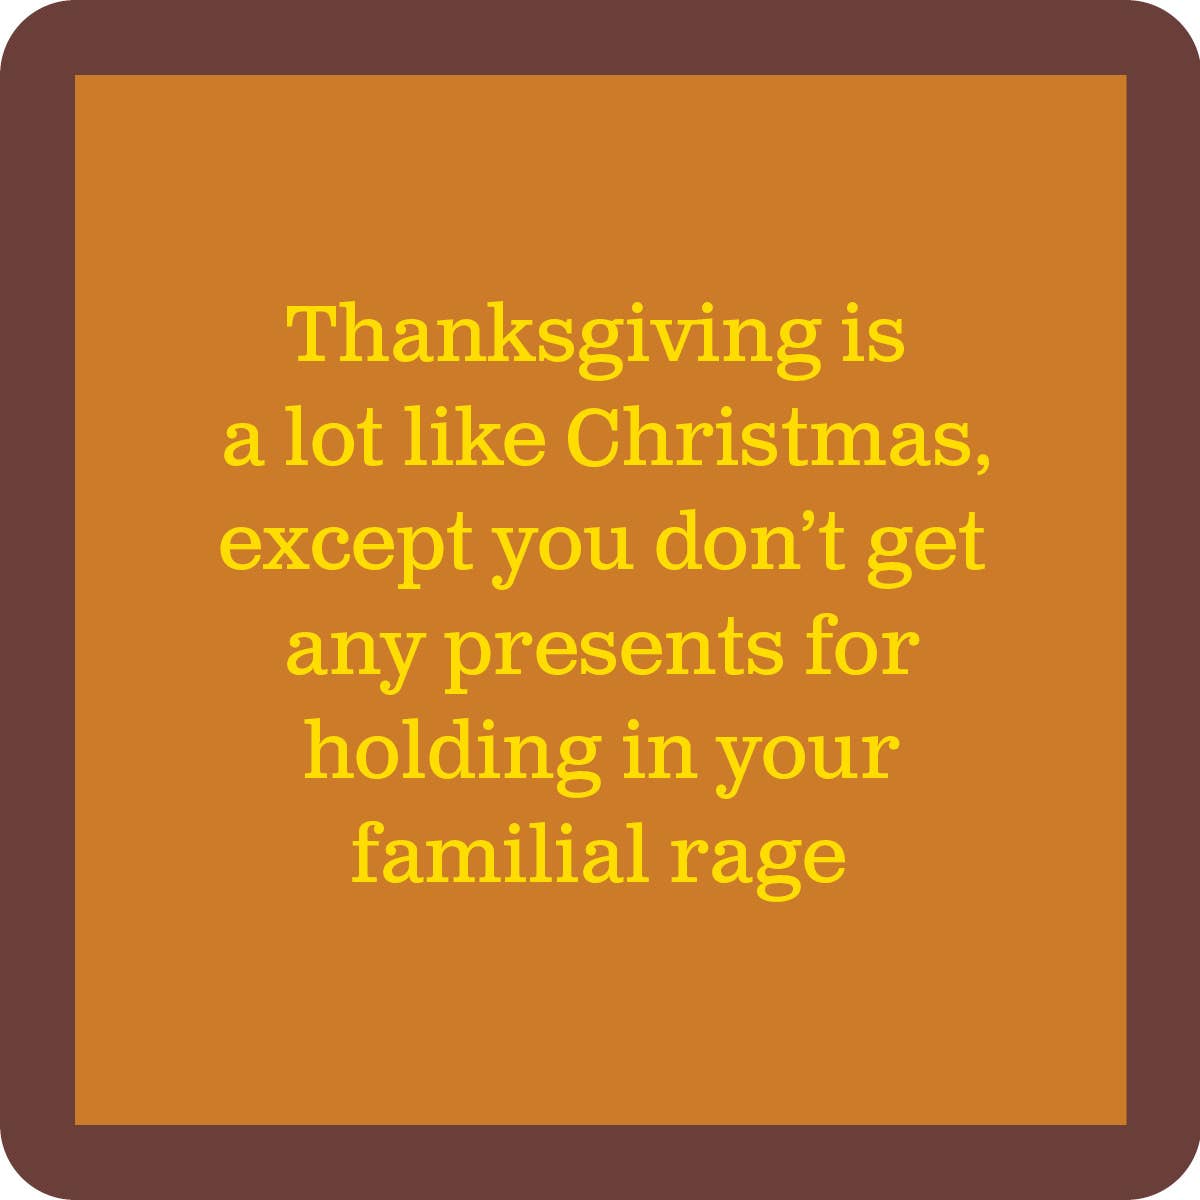 Drinks on Me - Thanksgiving Familial Rage